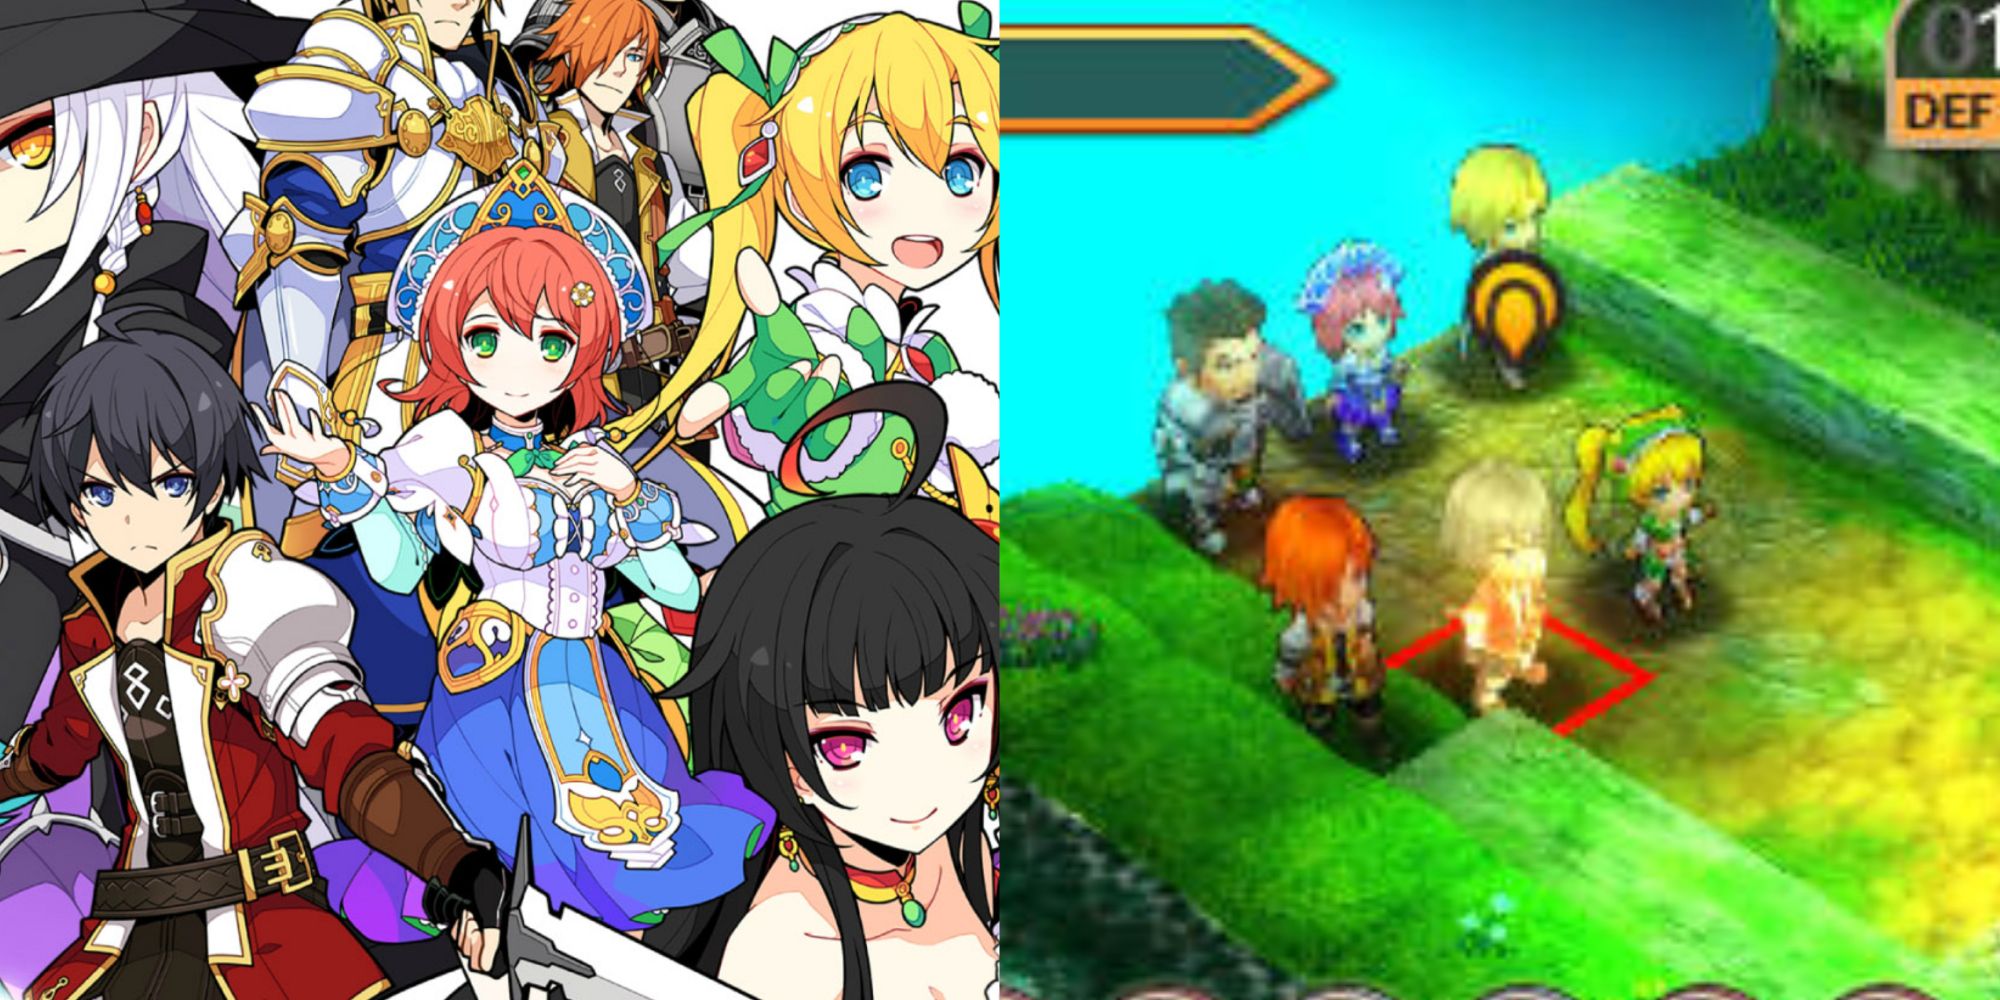 Split image screenshots of the Stella Glow cast in official art and the party in a grass area.